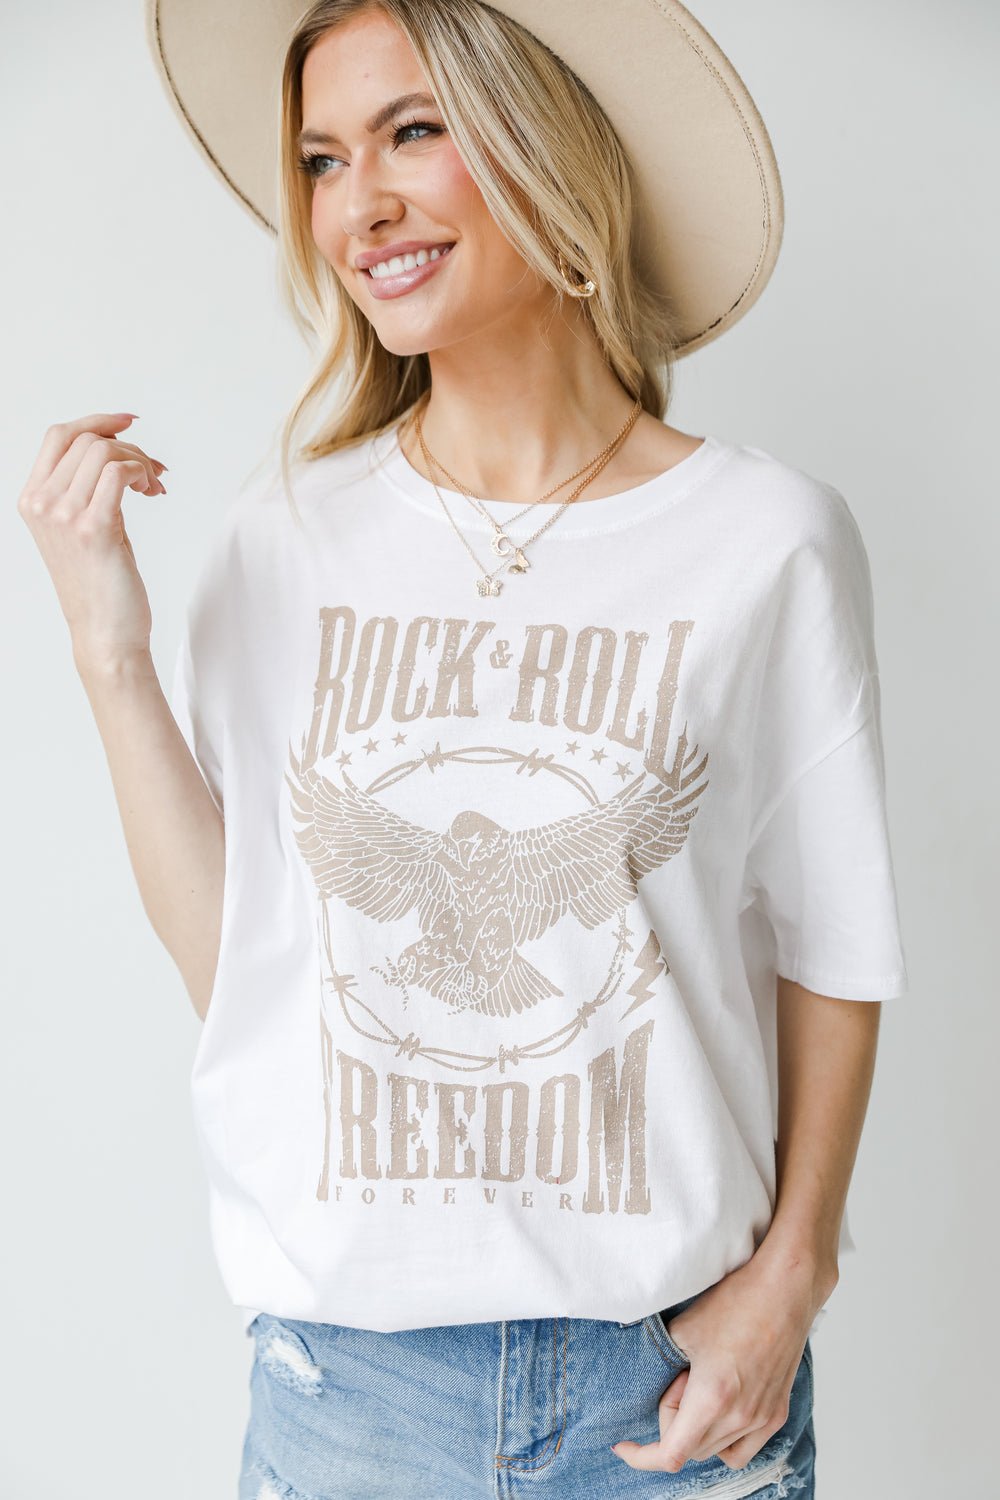 Rock & Roll Freedom Forever Graphic Tee from dress up